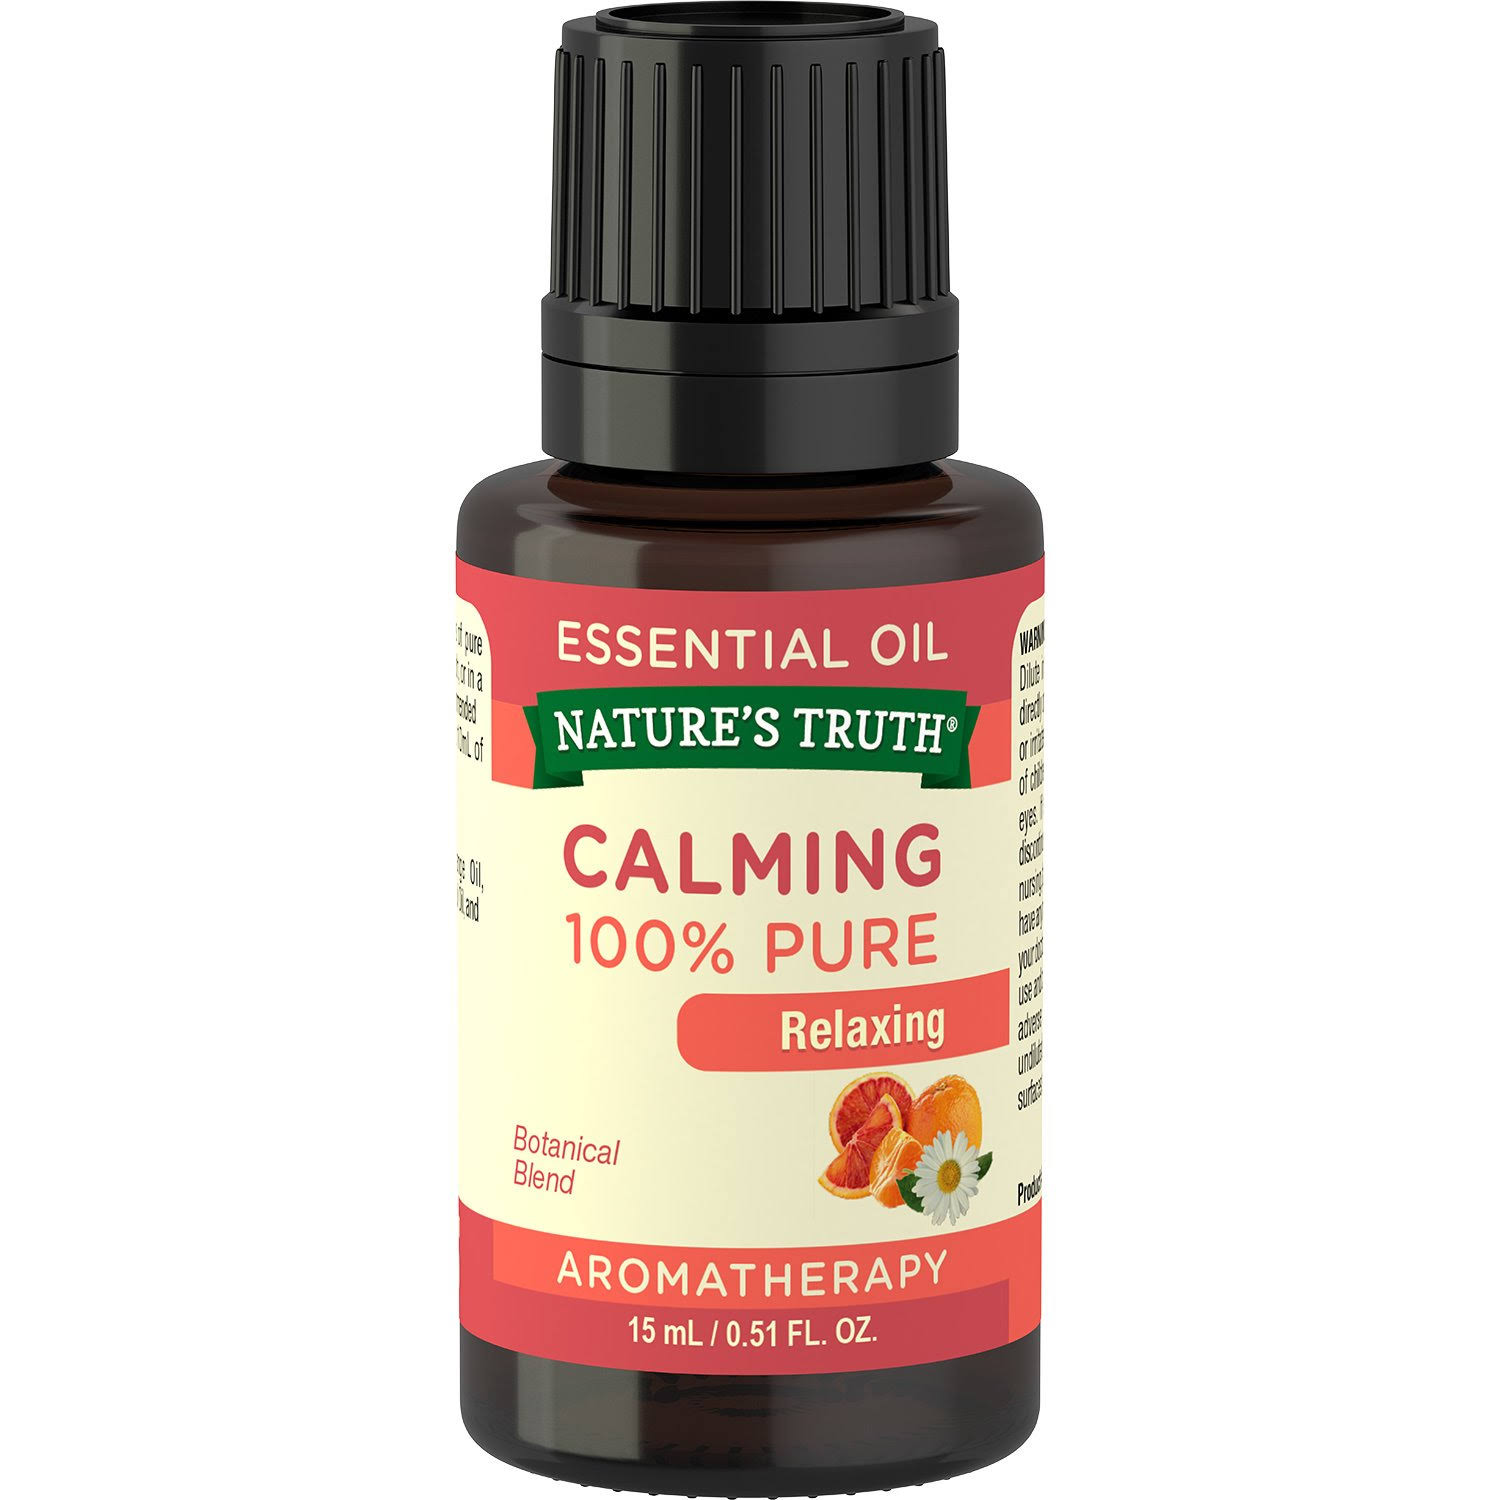 Nature's Truth Aromatherapy Calming 100% Pure Essential Oil - 15ml